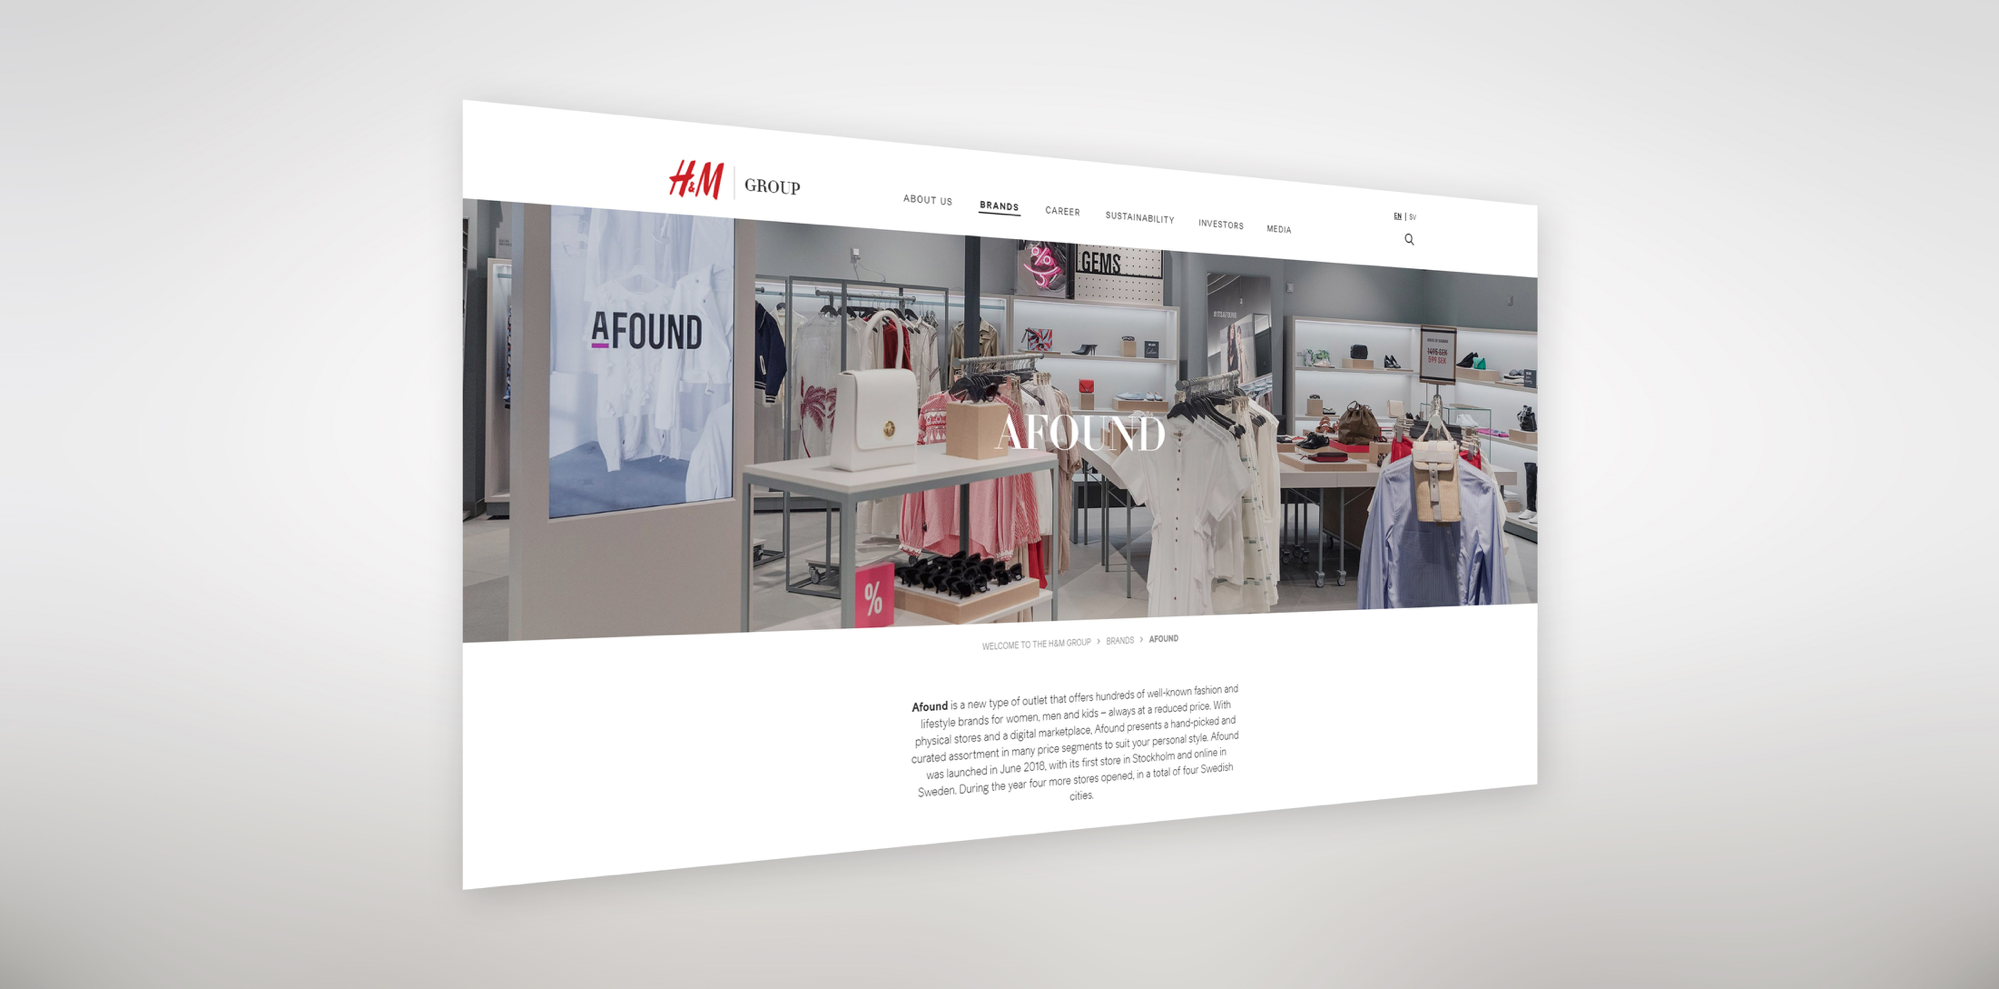 H&M Group Brings a New Model to the Market With Afound